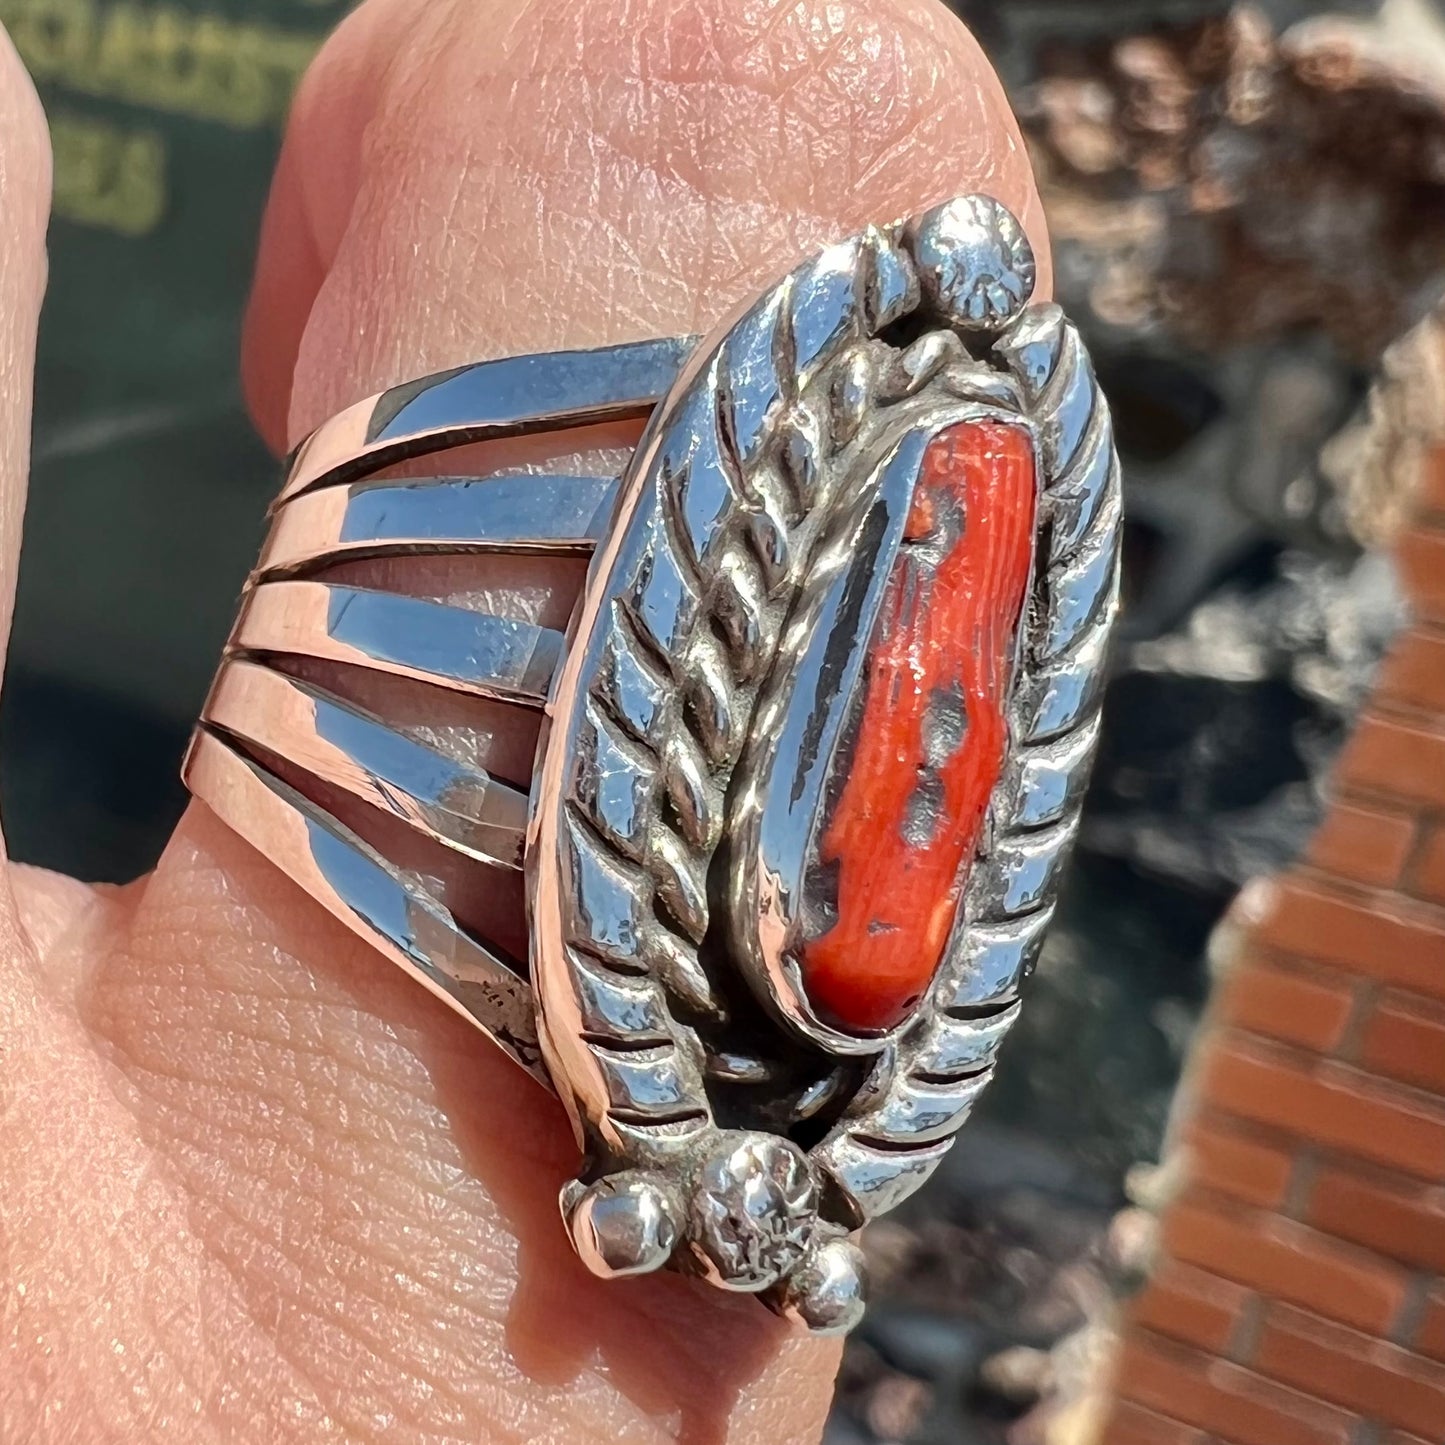 A sterling silver ring set with a polished red coral branch handmade by Navajo artist, Delbert Chatter.